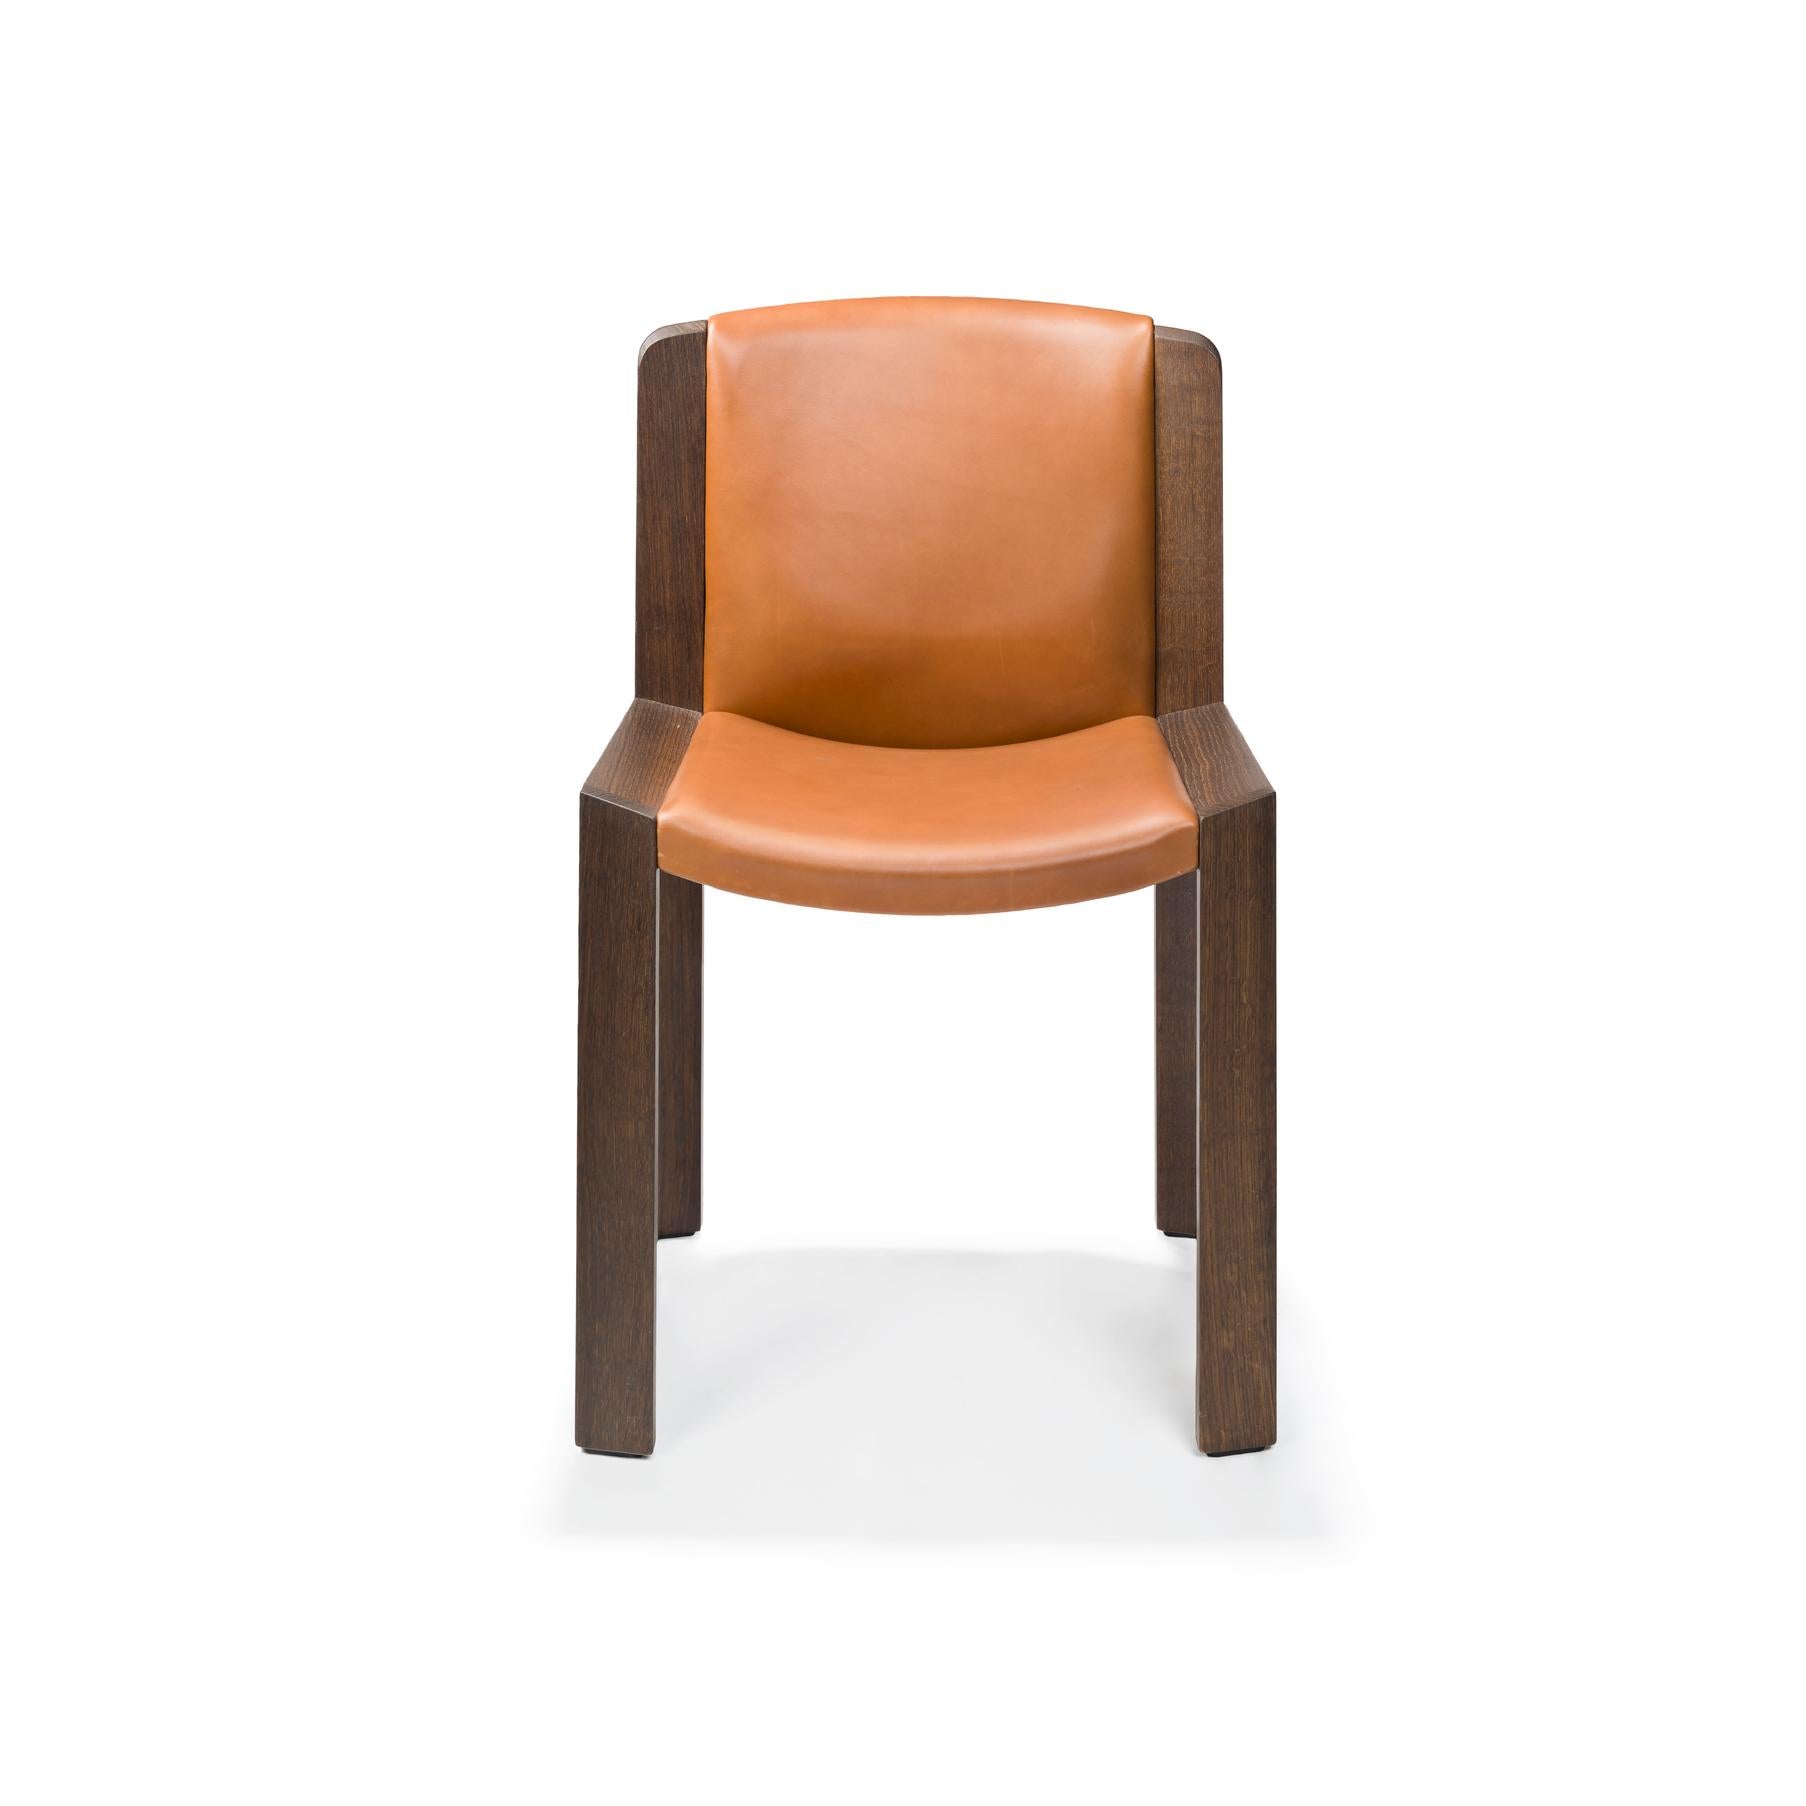 Mid-Century Modern Joe Colombo 'Chair 300' Wood and Sørensen Leather Chair by Karakter For Sale